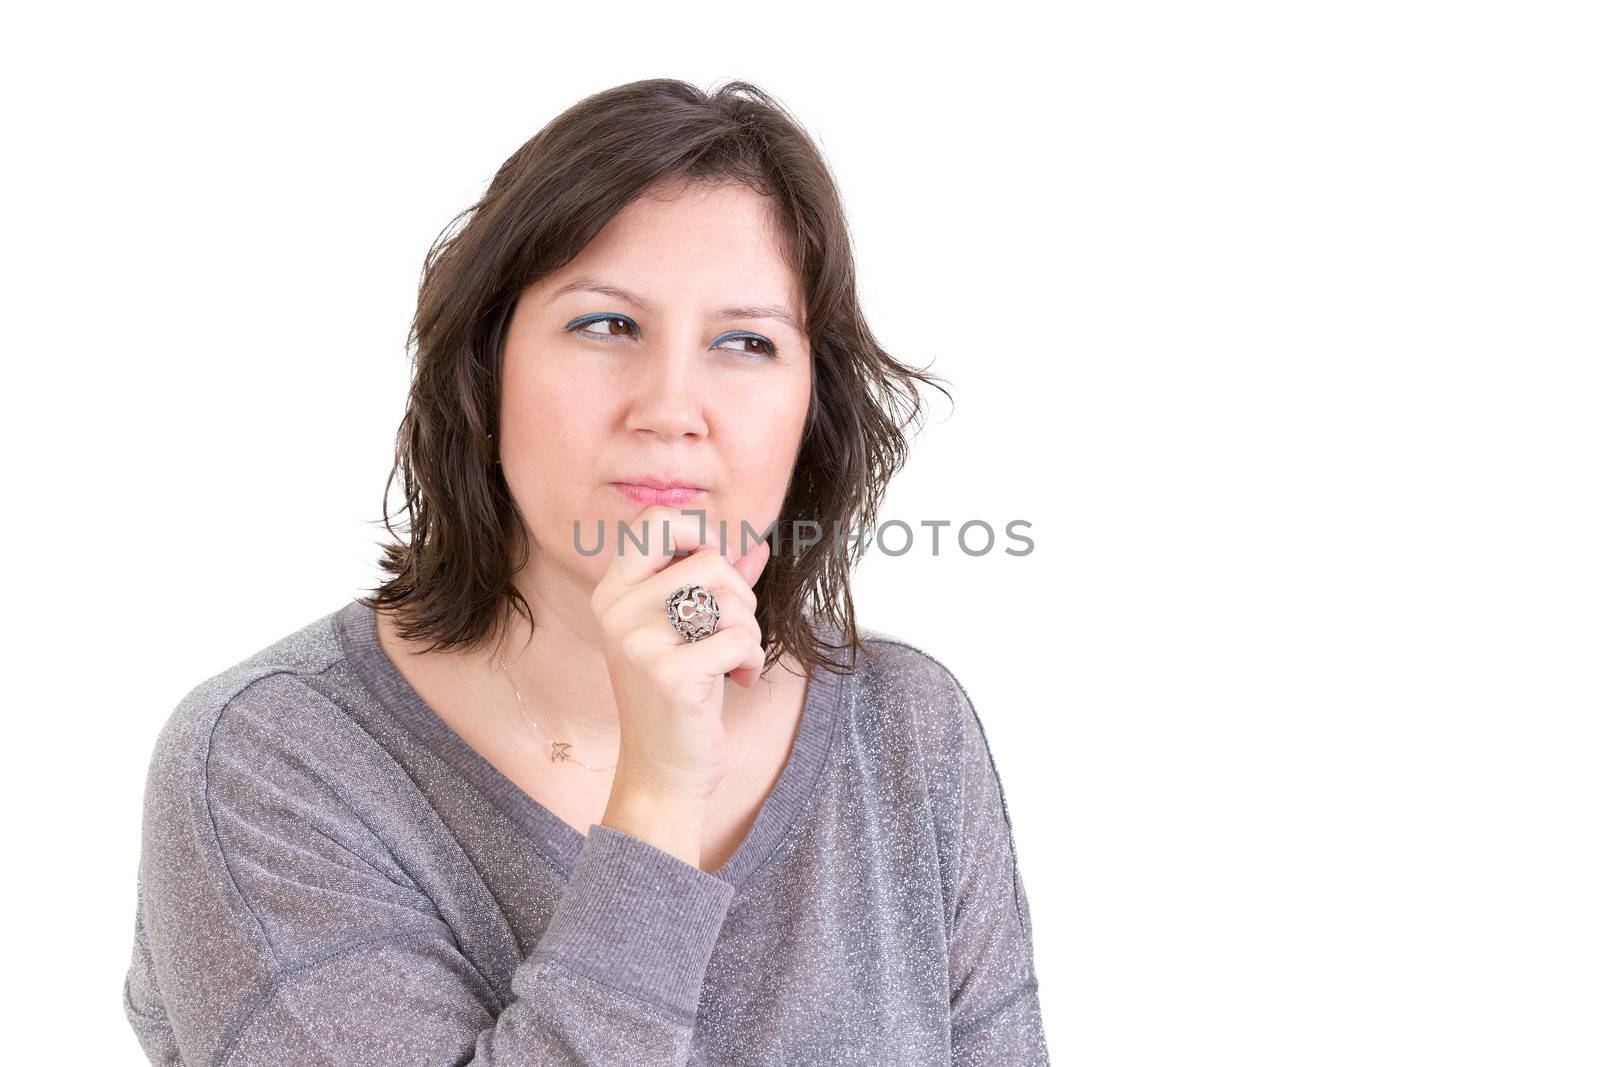 Woman with a calculating pensive look sitting with her hand to her chin as she plans and schemes for the future, isolated on white